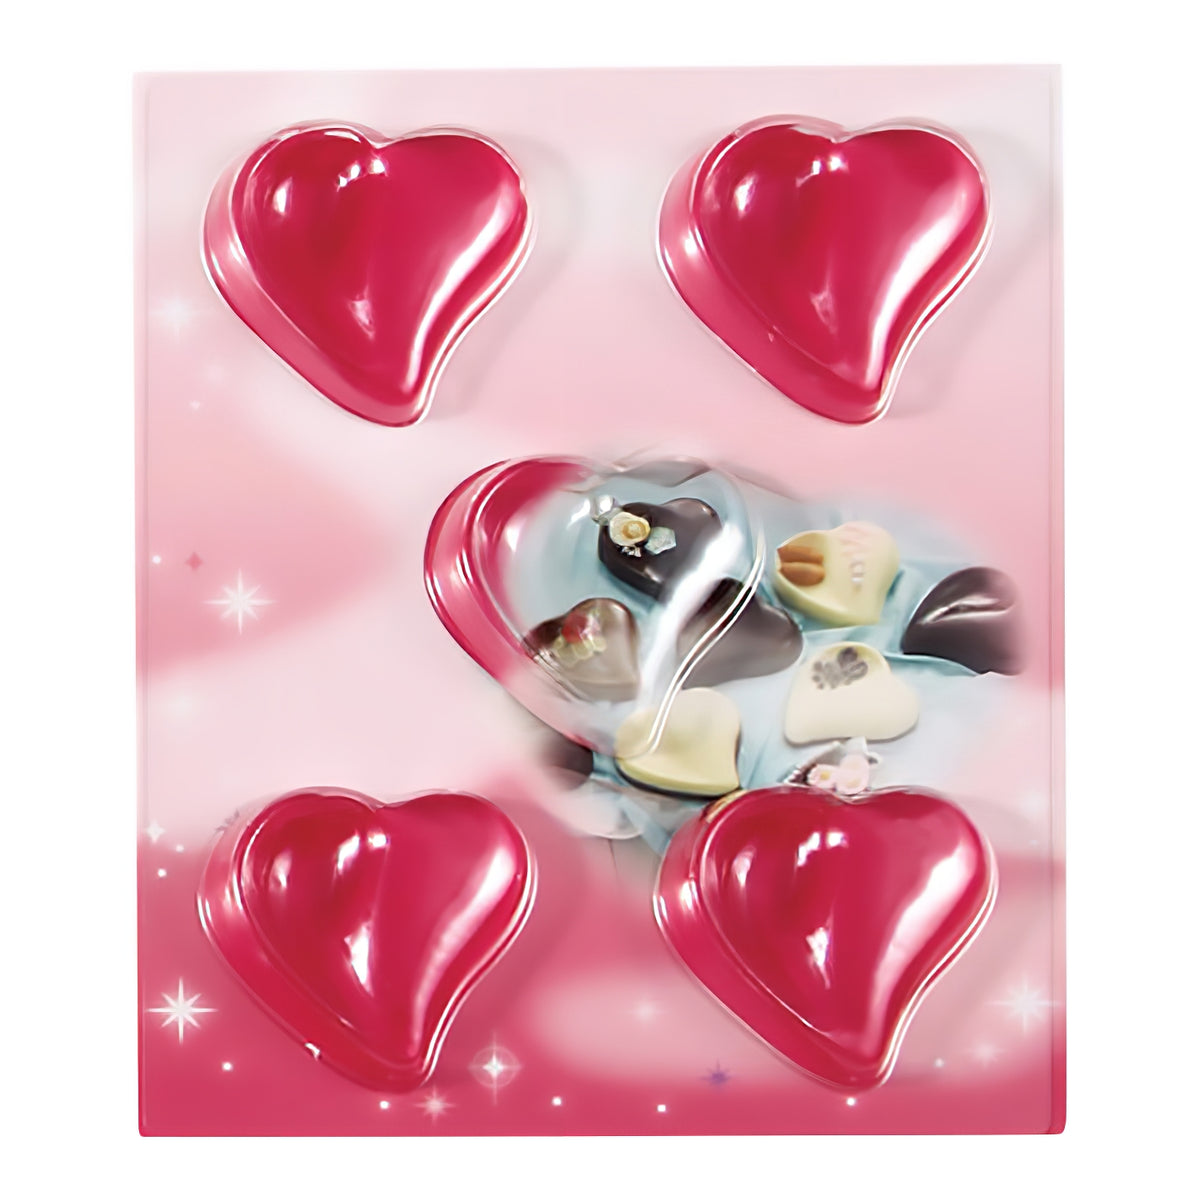 TIGERCROWN PET Resin Curvy Heart Chocolate Mold